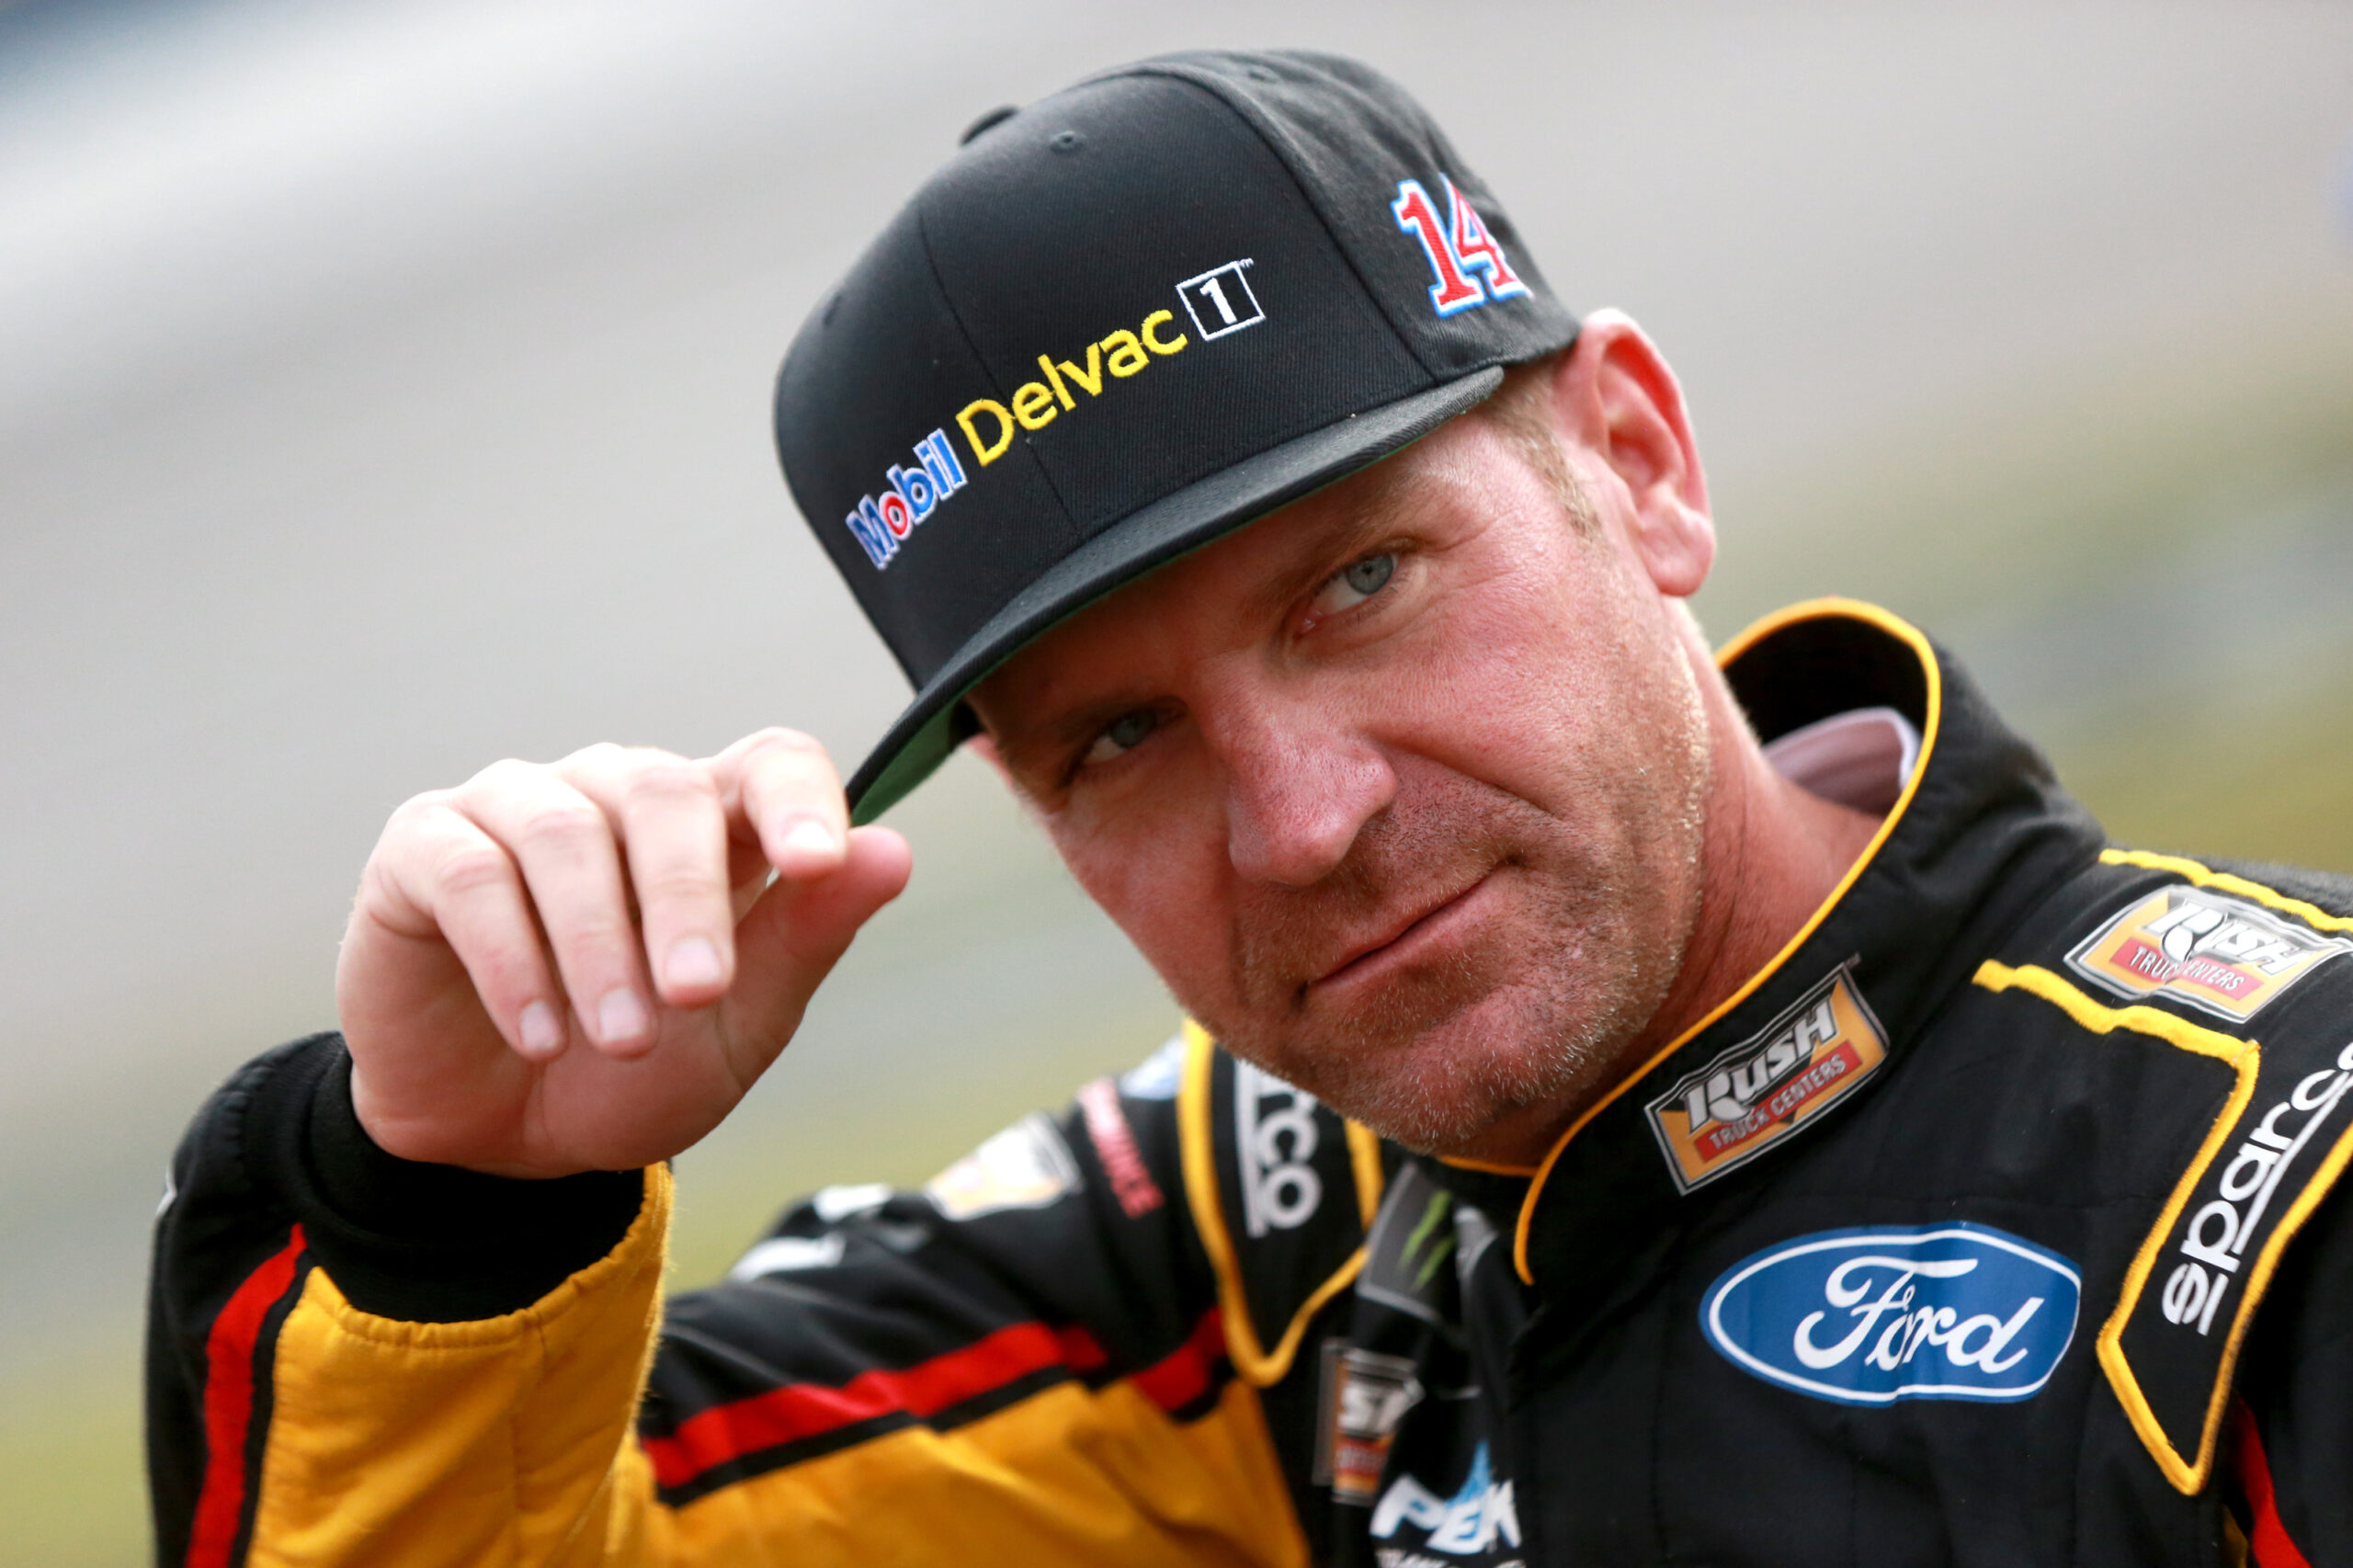 Clint Bowyer's probably staring us down right now. (Photo Credit: Sean Gardner/Getty Images)